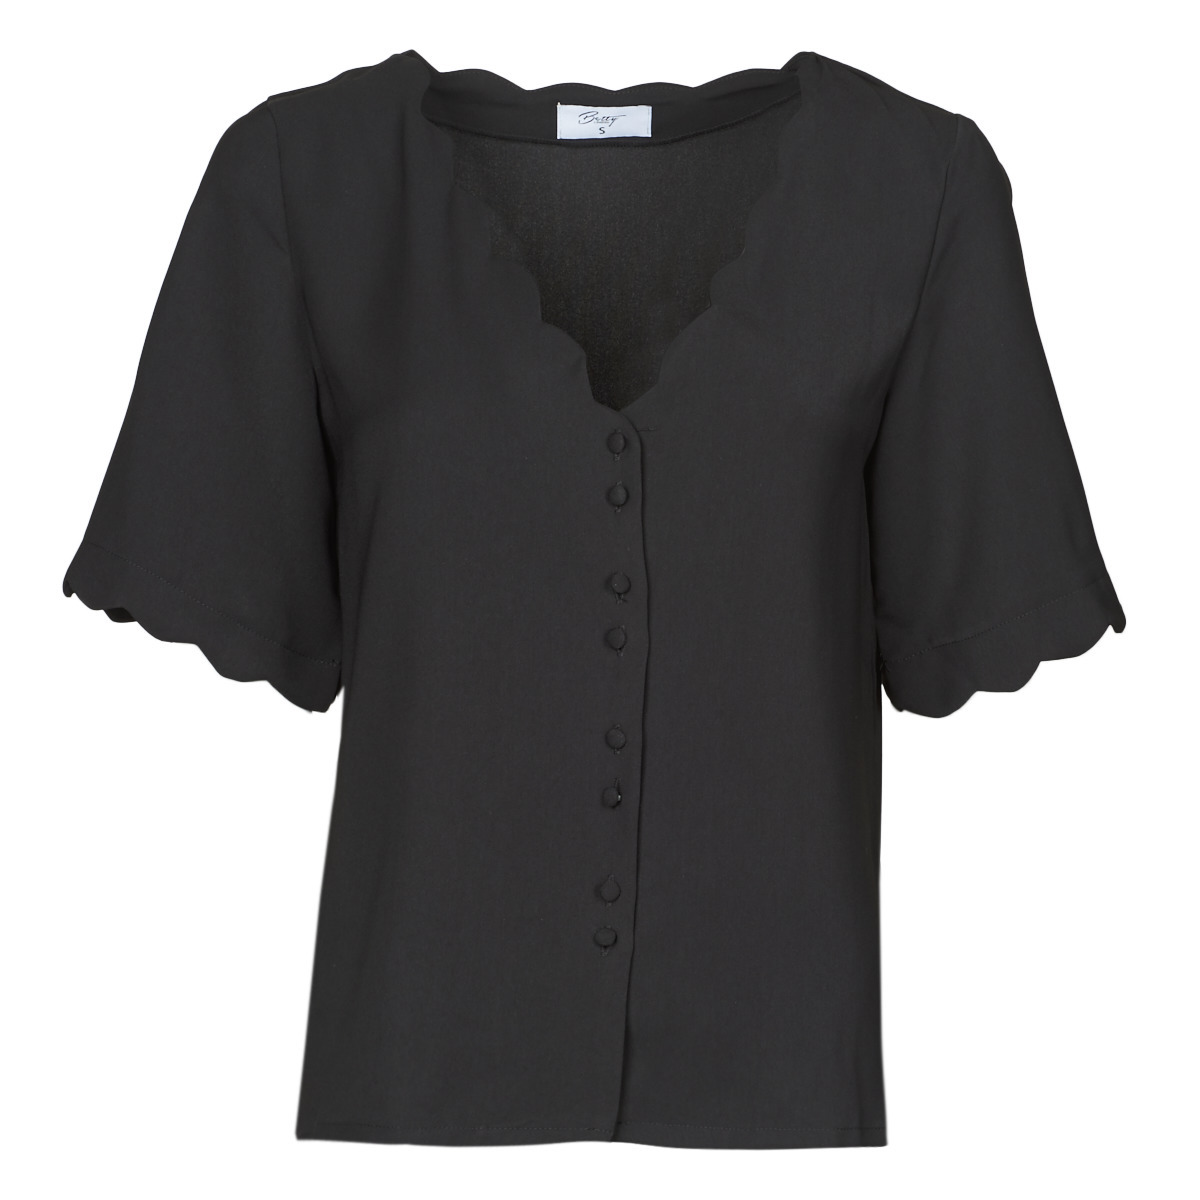 Betty London - Black Blouse for Women by Spartoo GOOFASH